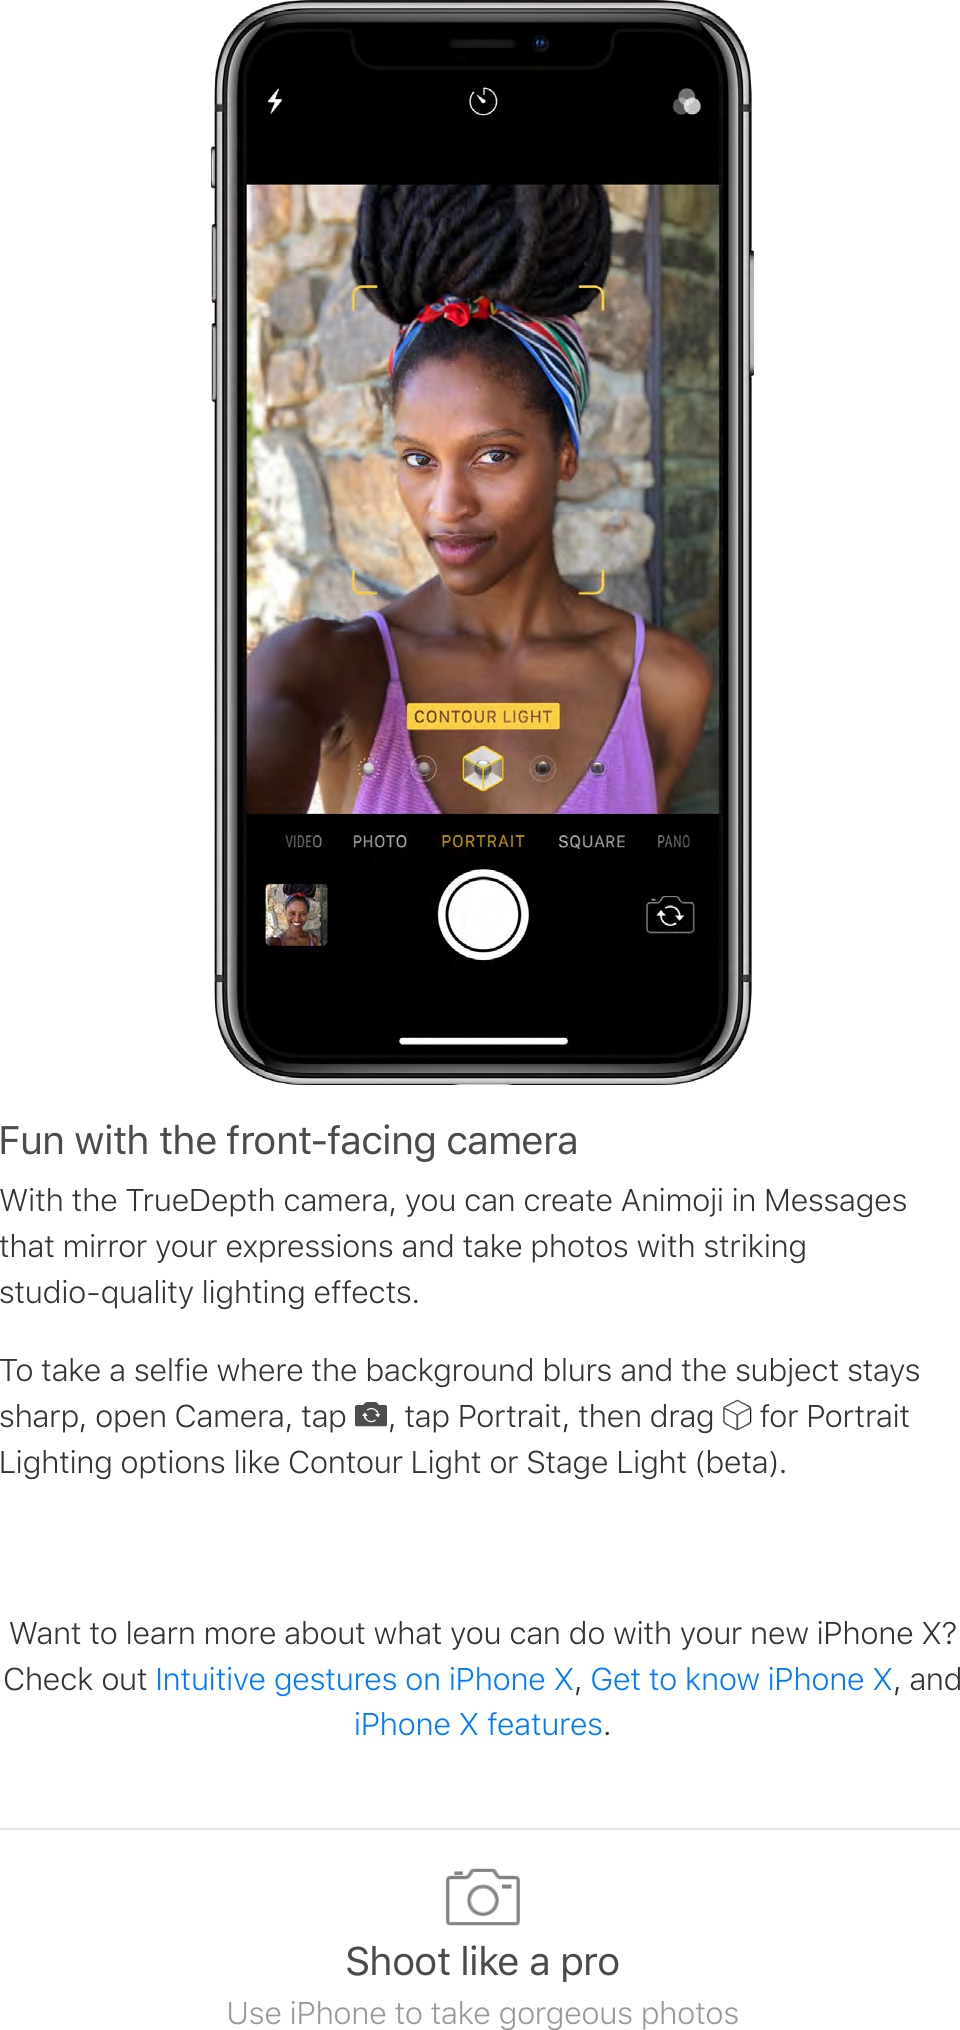 56%&apos;3!*#&apos;*#&amp;&apos;70$%*87-/!%4&apos;/-9&amp;0-With the TrueDepth camera, you can create Animoji in Messagesthat mirror your expressions and take photos with strikingstudio-quality lighting effects.To take a selfie where the background blurs and the subject stayssharp, open Camera, tap  , tap Portrait, then drag   for PortraitLighting options like Contour Light or Stage Light (beta).Want to learn more about what you can do with your new iPhone X?Check out  ,  , and.Intuitive gestures on iPhone X Get to know iPhone XiPhone X features:#$$*&apos;.!2&amp;&apos;-&apos;;0$Use iPhone to take gorgeous photos